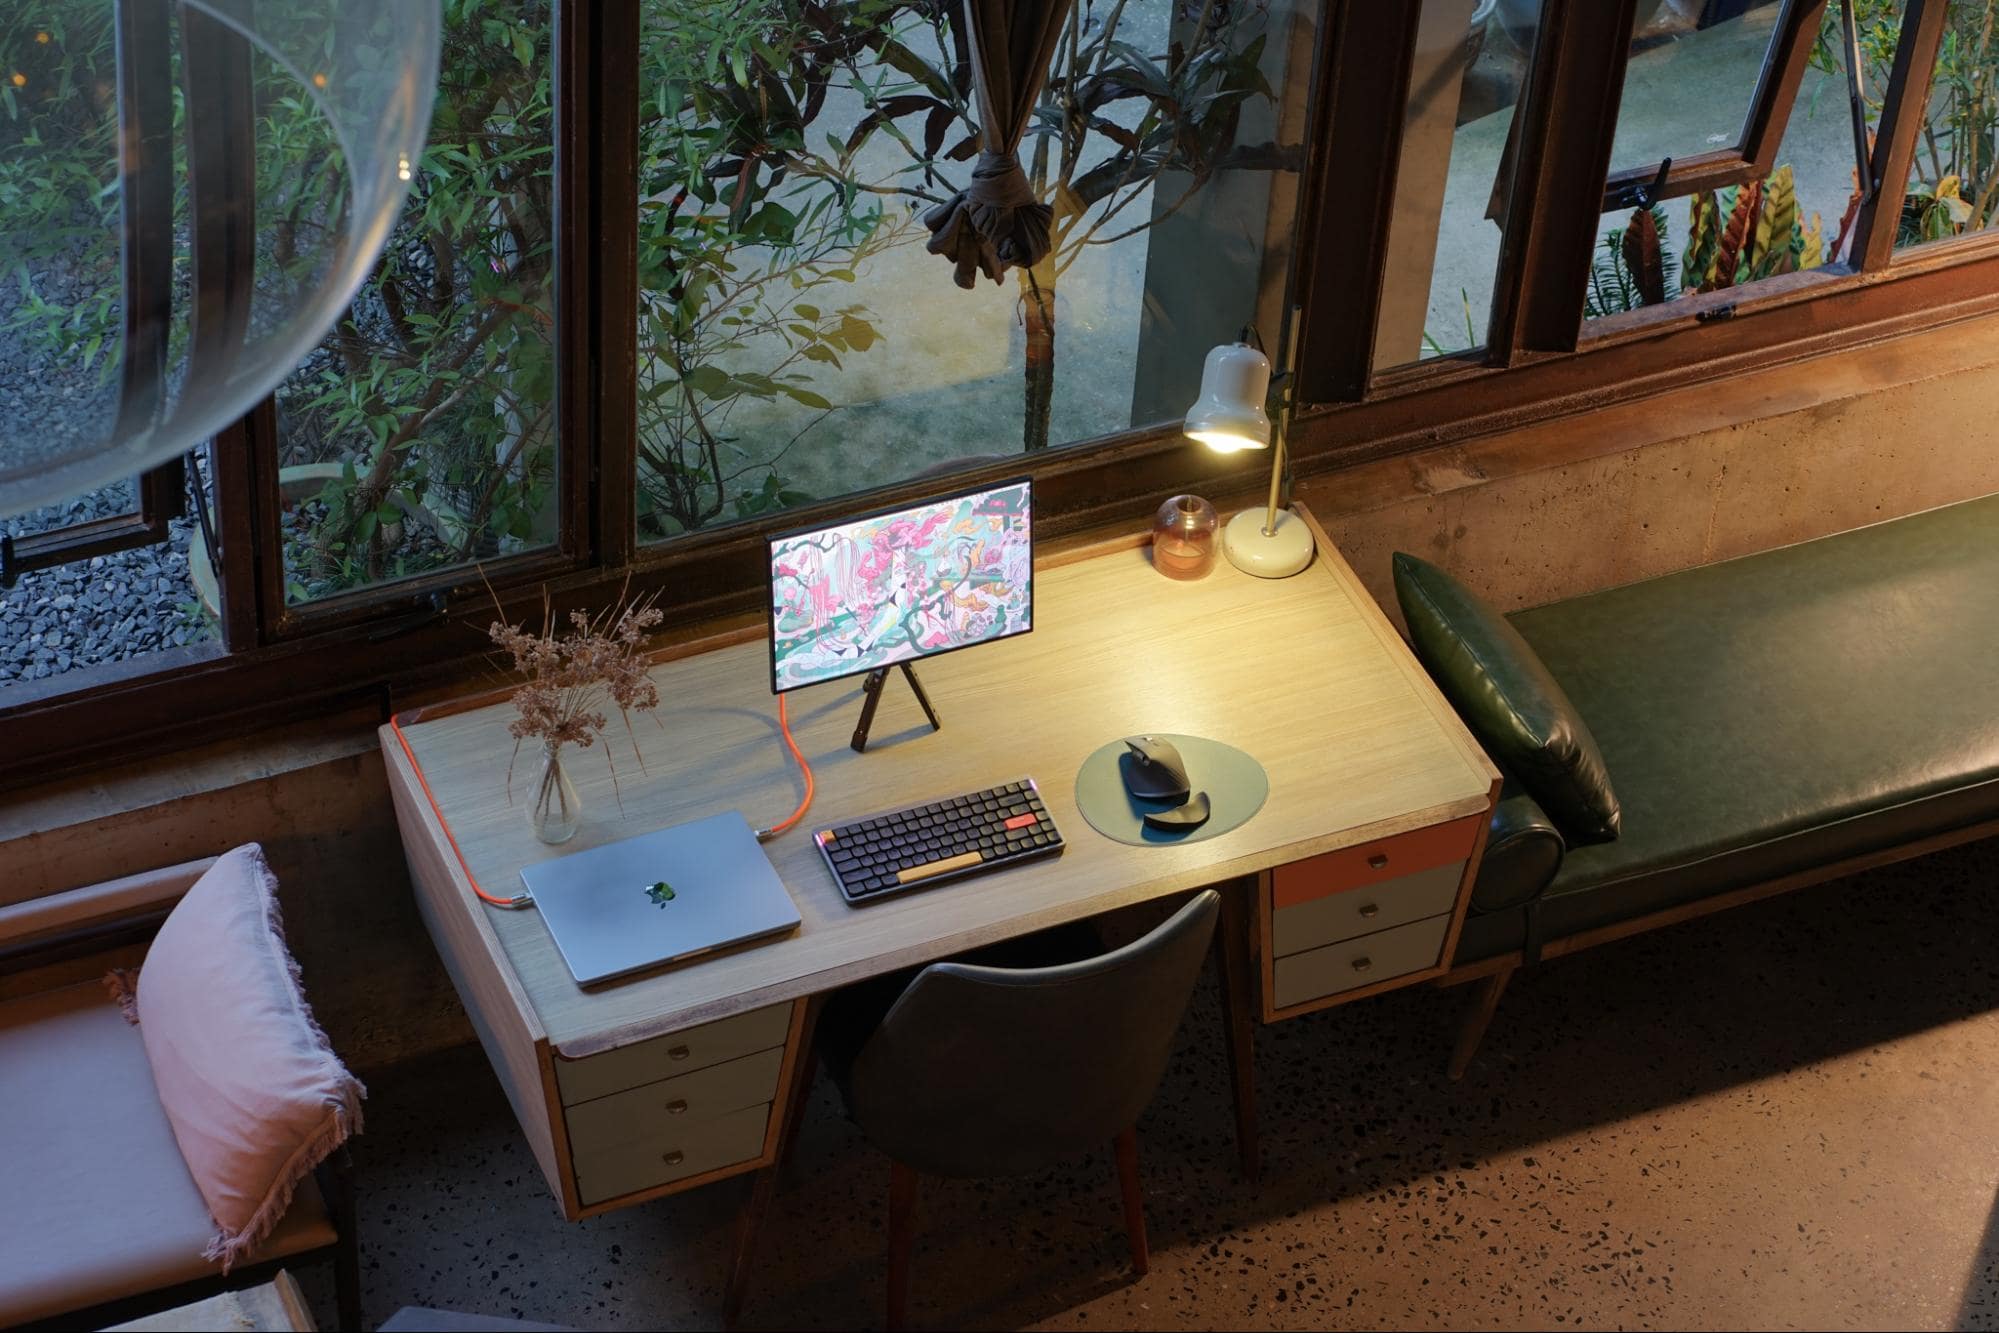 A well-organised, sophisticated desk setup with panoramic windows